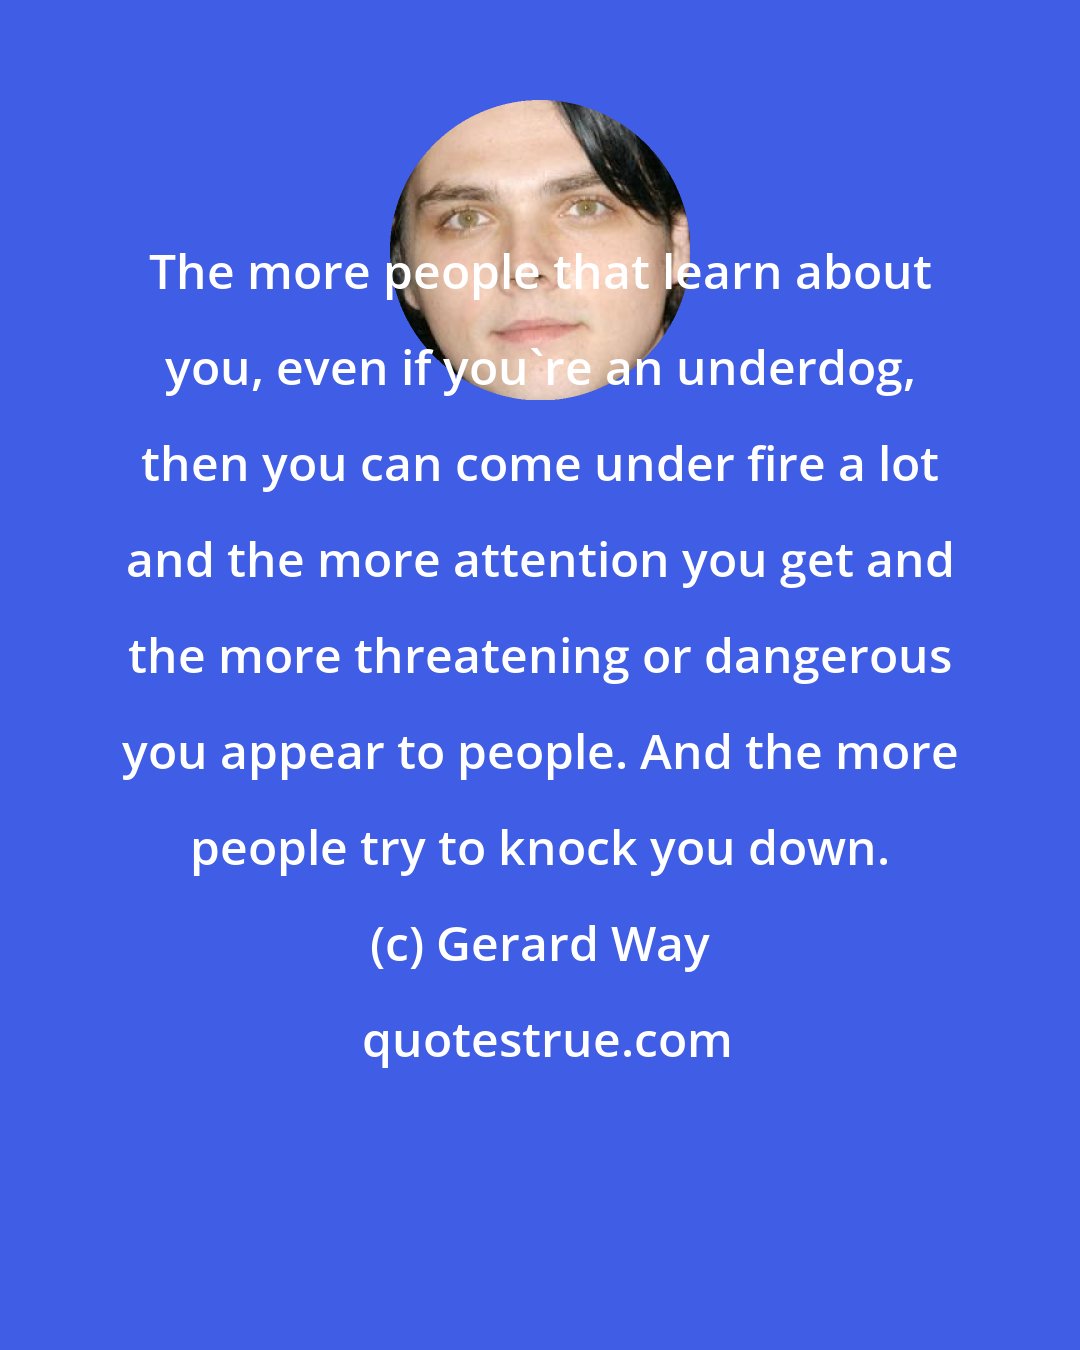 Gerard Way: The more people that learn about you, even if you're an underdog, then you can come under fire a lot and the more attention you get and the more threatening or dangerous you appear to people. And the more people try to knock you down.